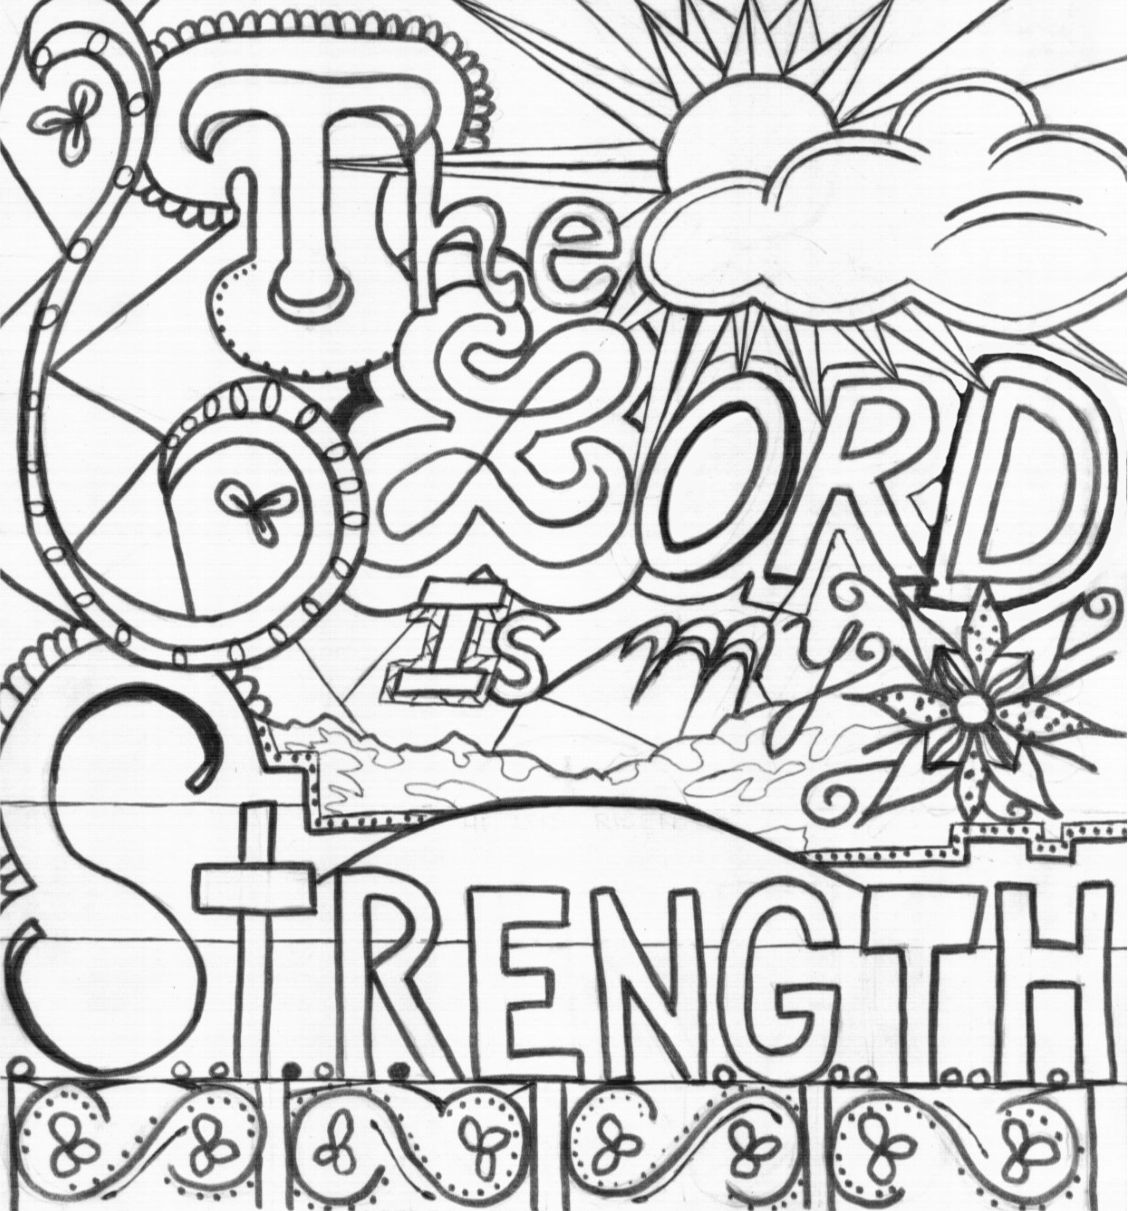 Pin on Bible - Scripture, Art & Resources